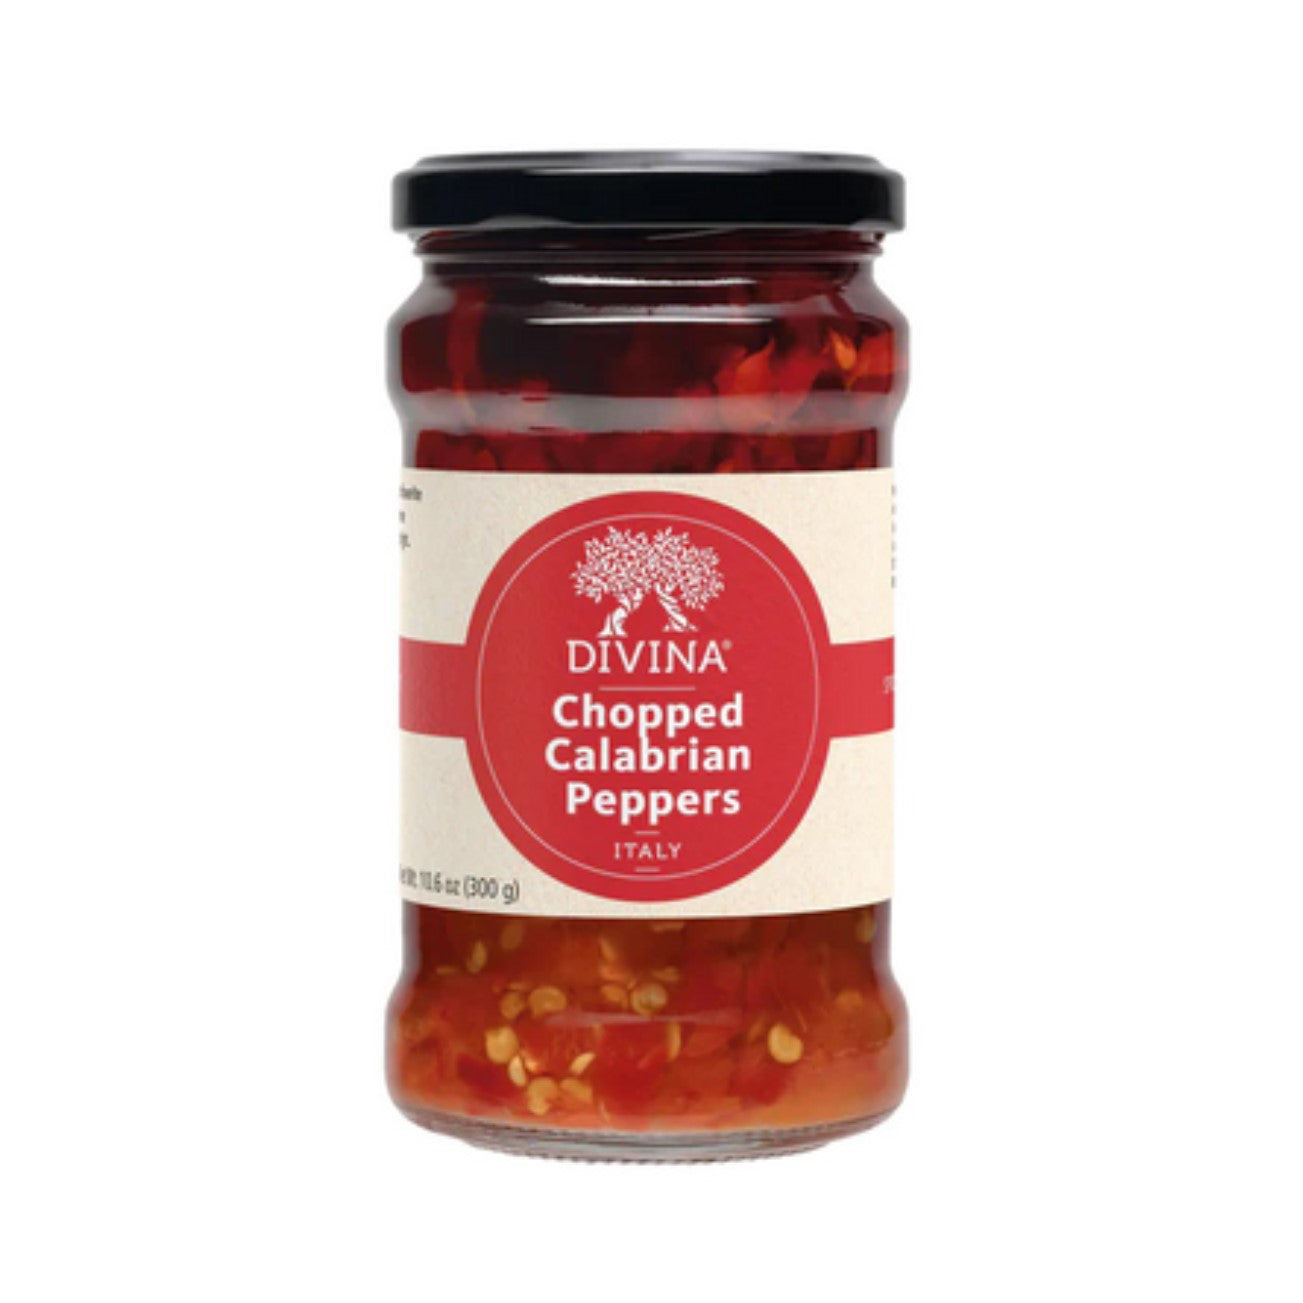 Divina Chopped Calabrian Peppers